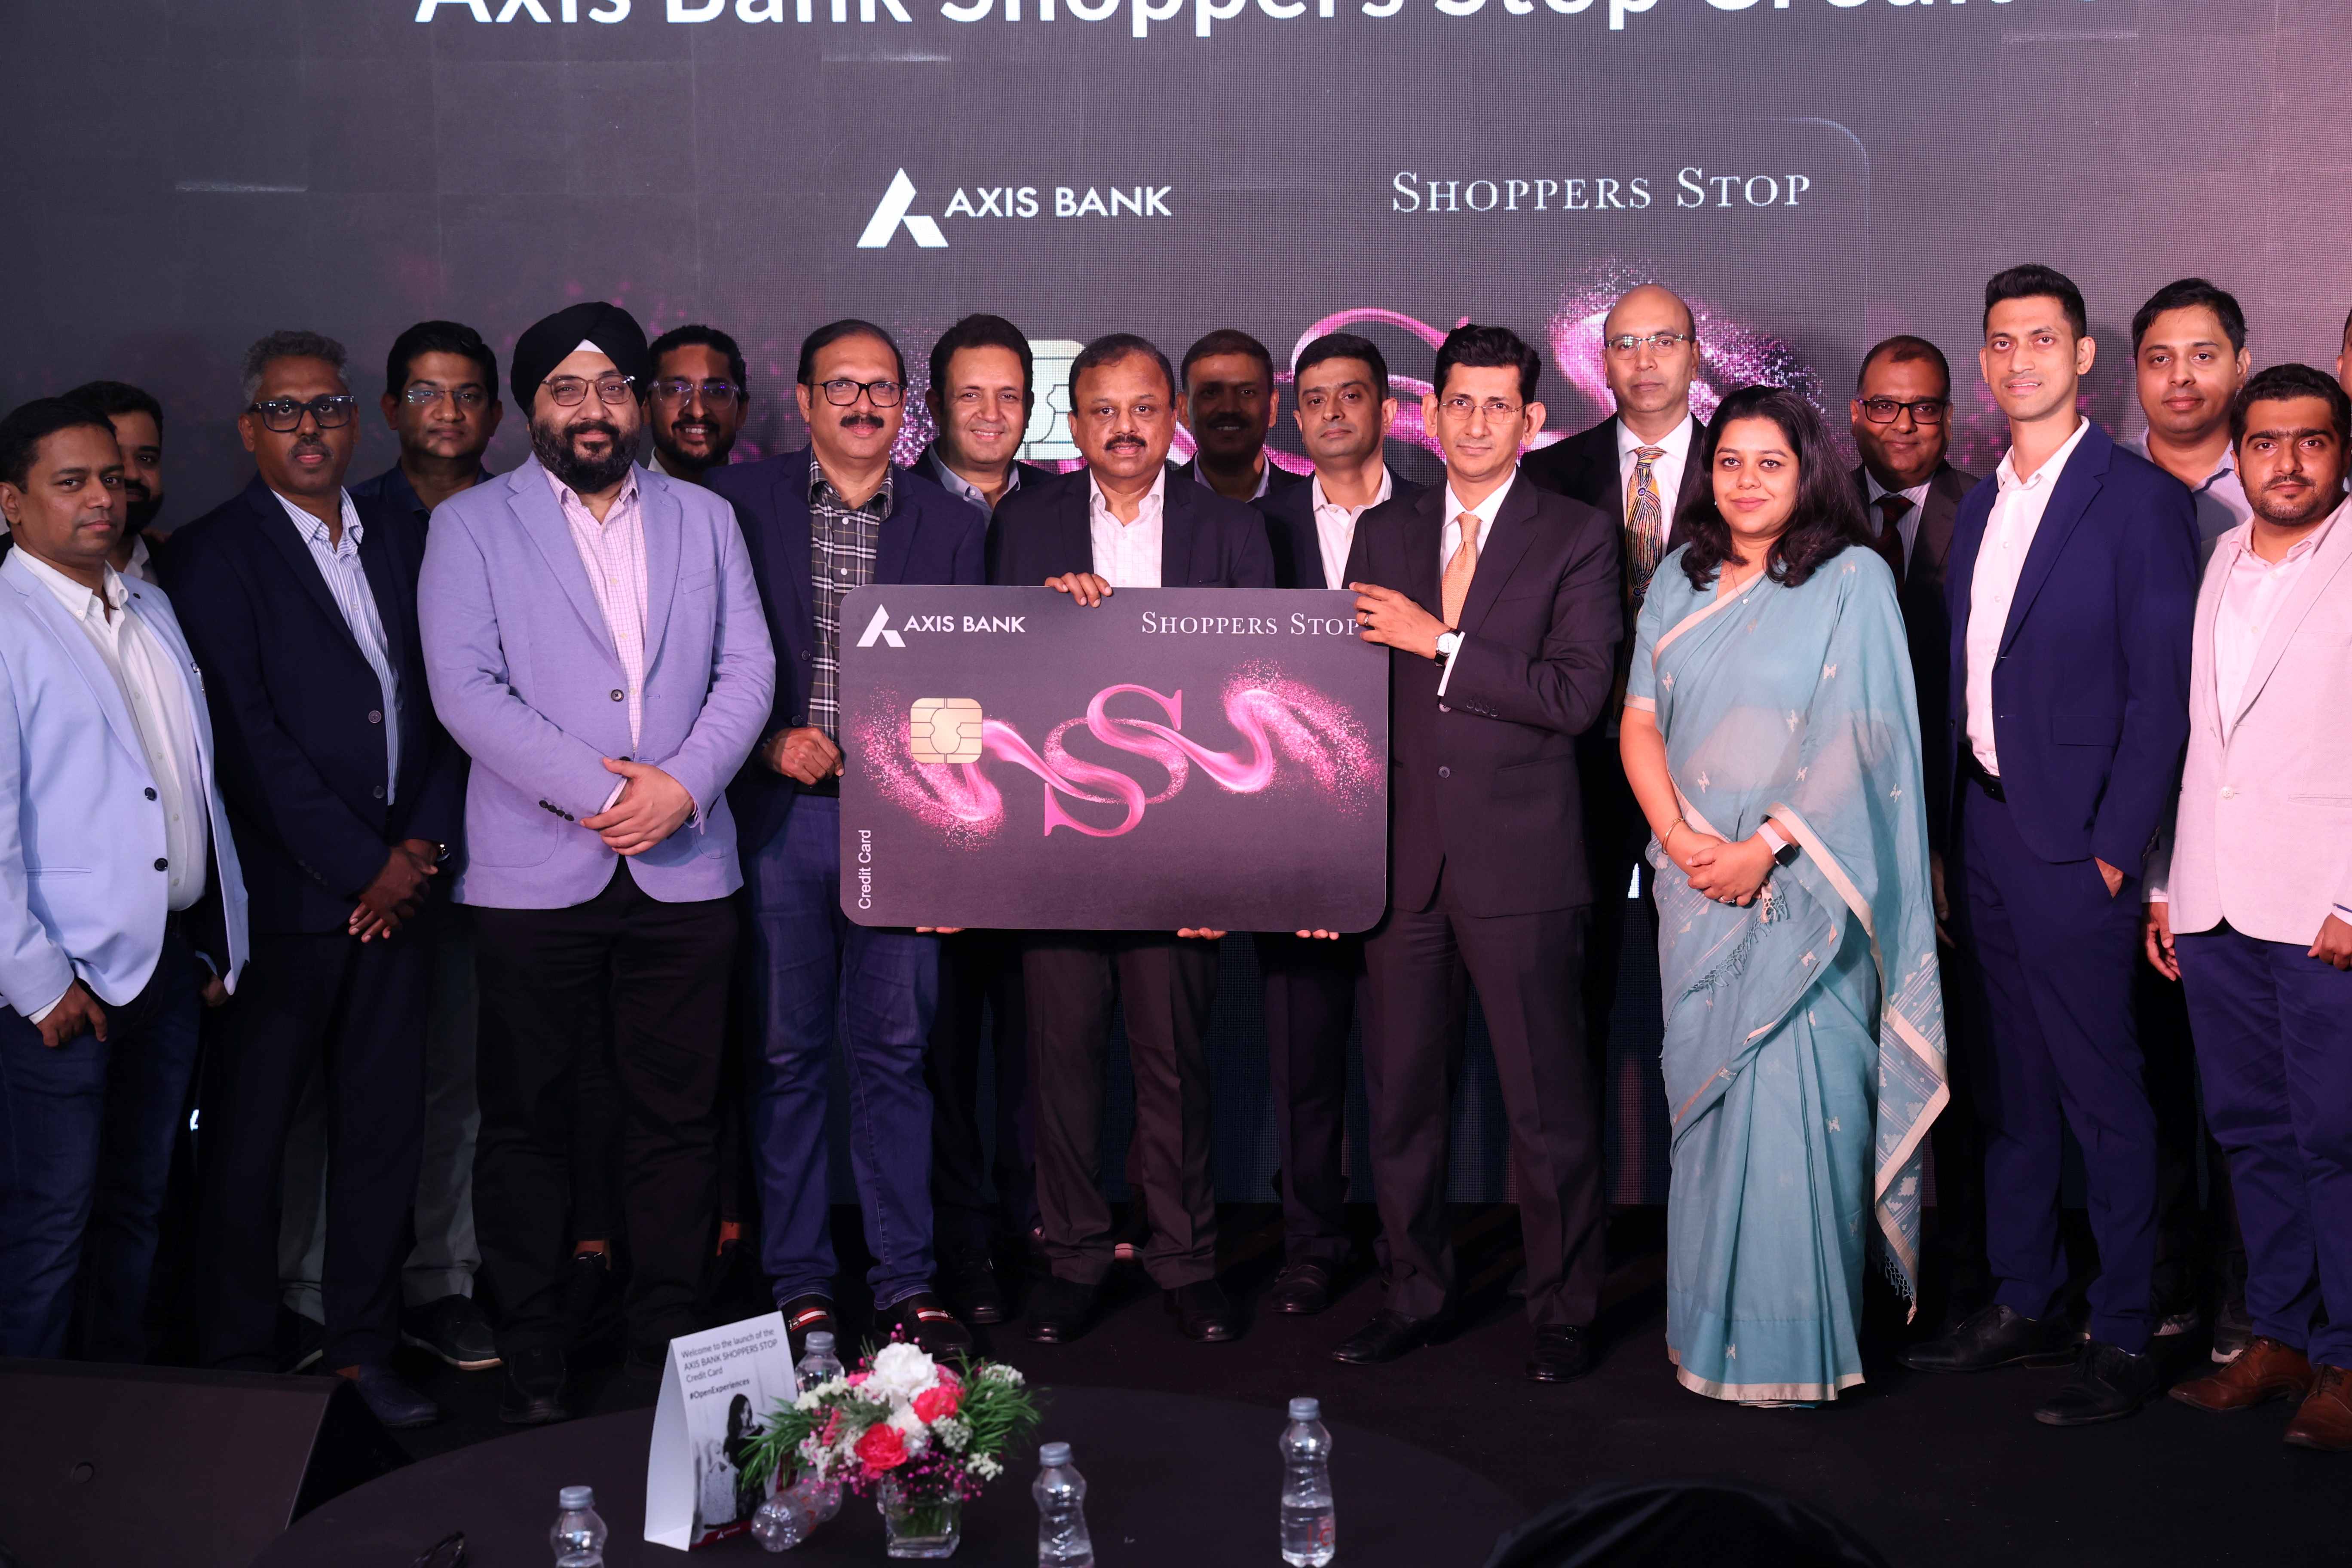  Axis Bank expands its omni-channel shopping segment through its Credit Card partnership with Shoppers Stop 